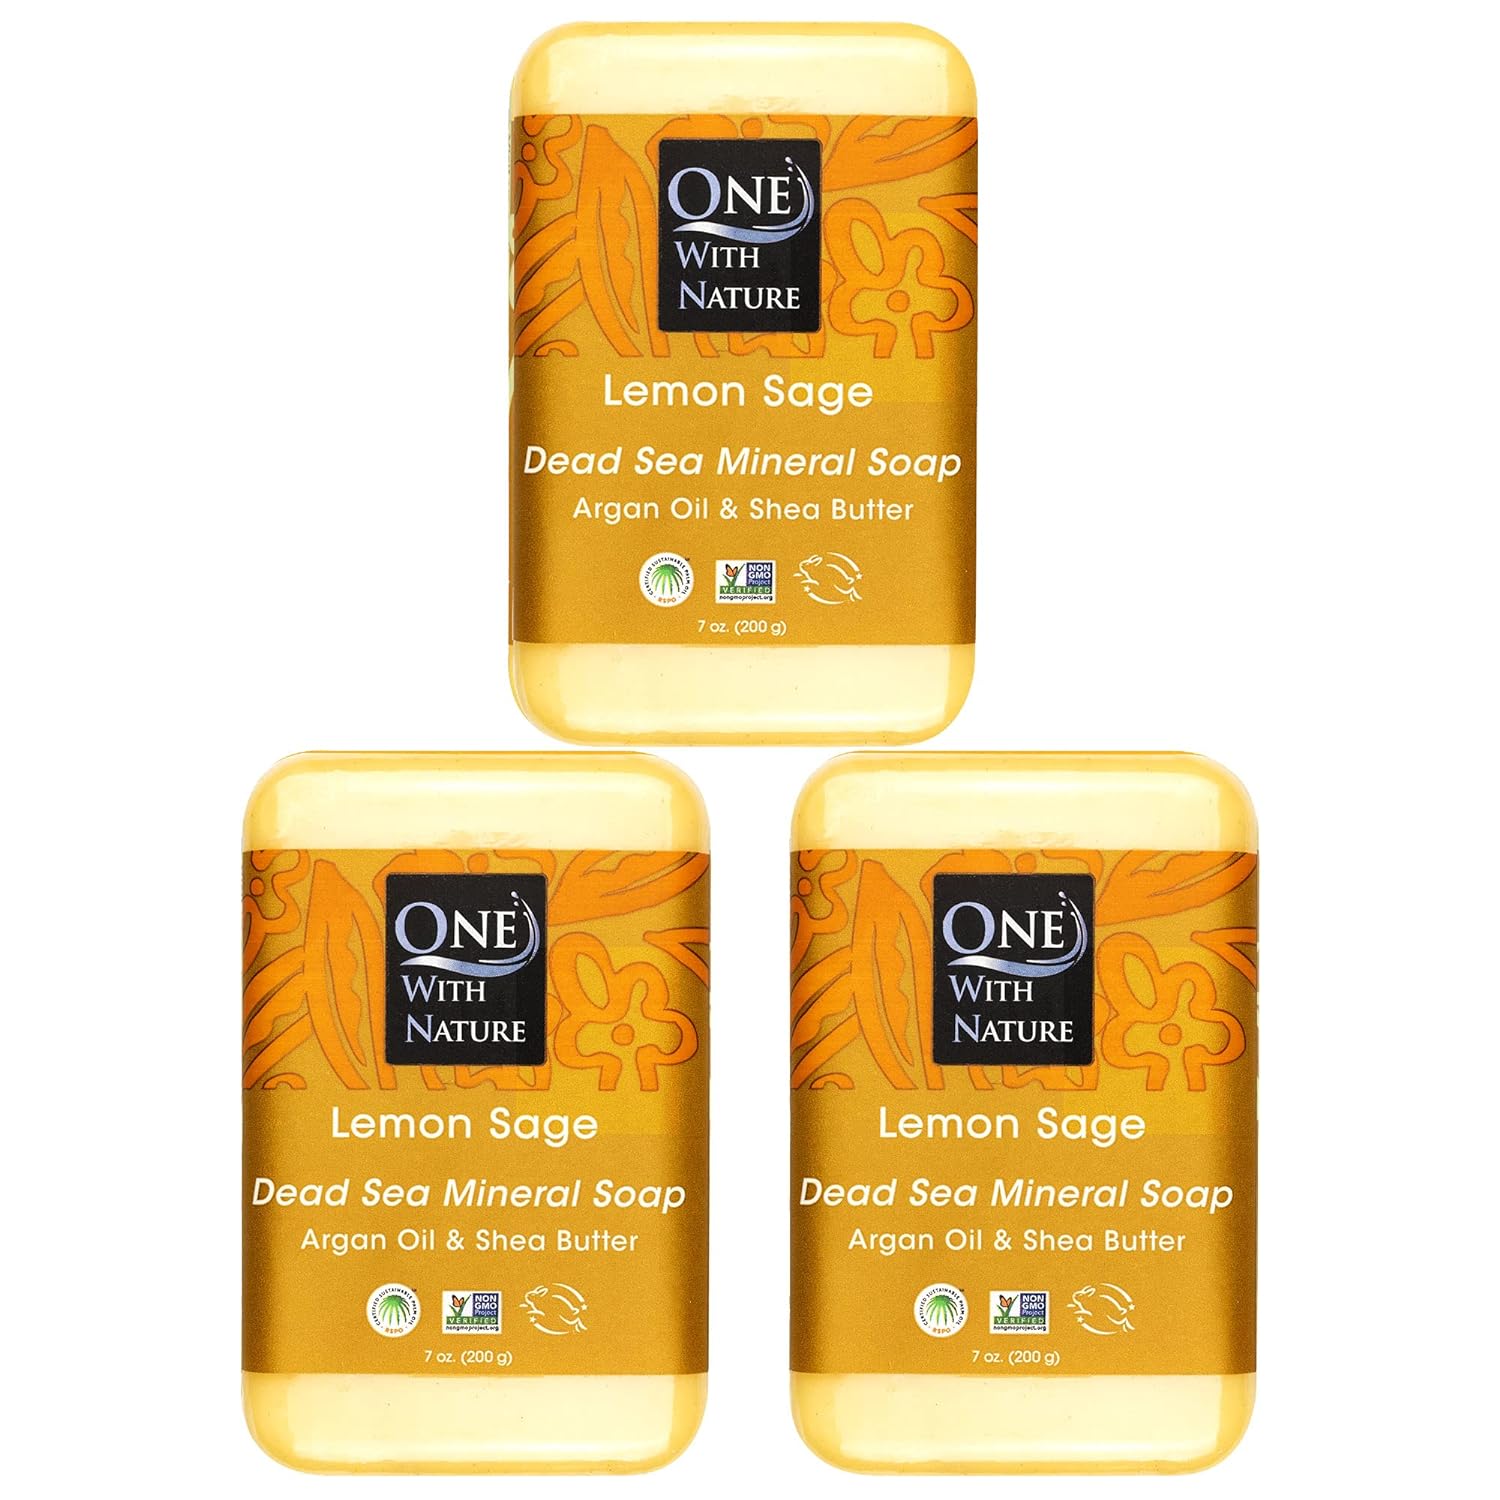 DEAD SEA MINERAL LEMON Sage 7  Soap 3 PK in BRANDED BOX, with Dead Sea Salt Containing Sulfur, Magnesium, and 21 Essential Minerals. Shea Butter, Argan Oil. All Skin Types Acne, Eczema, Psoriasis